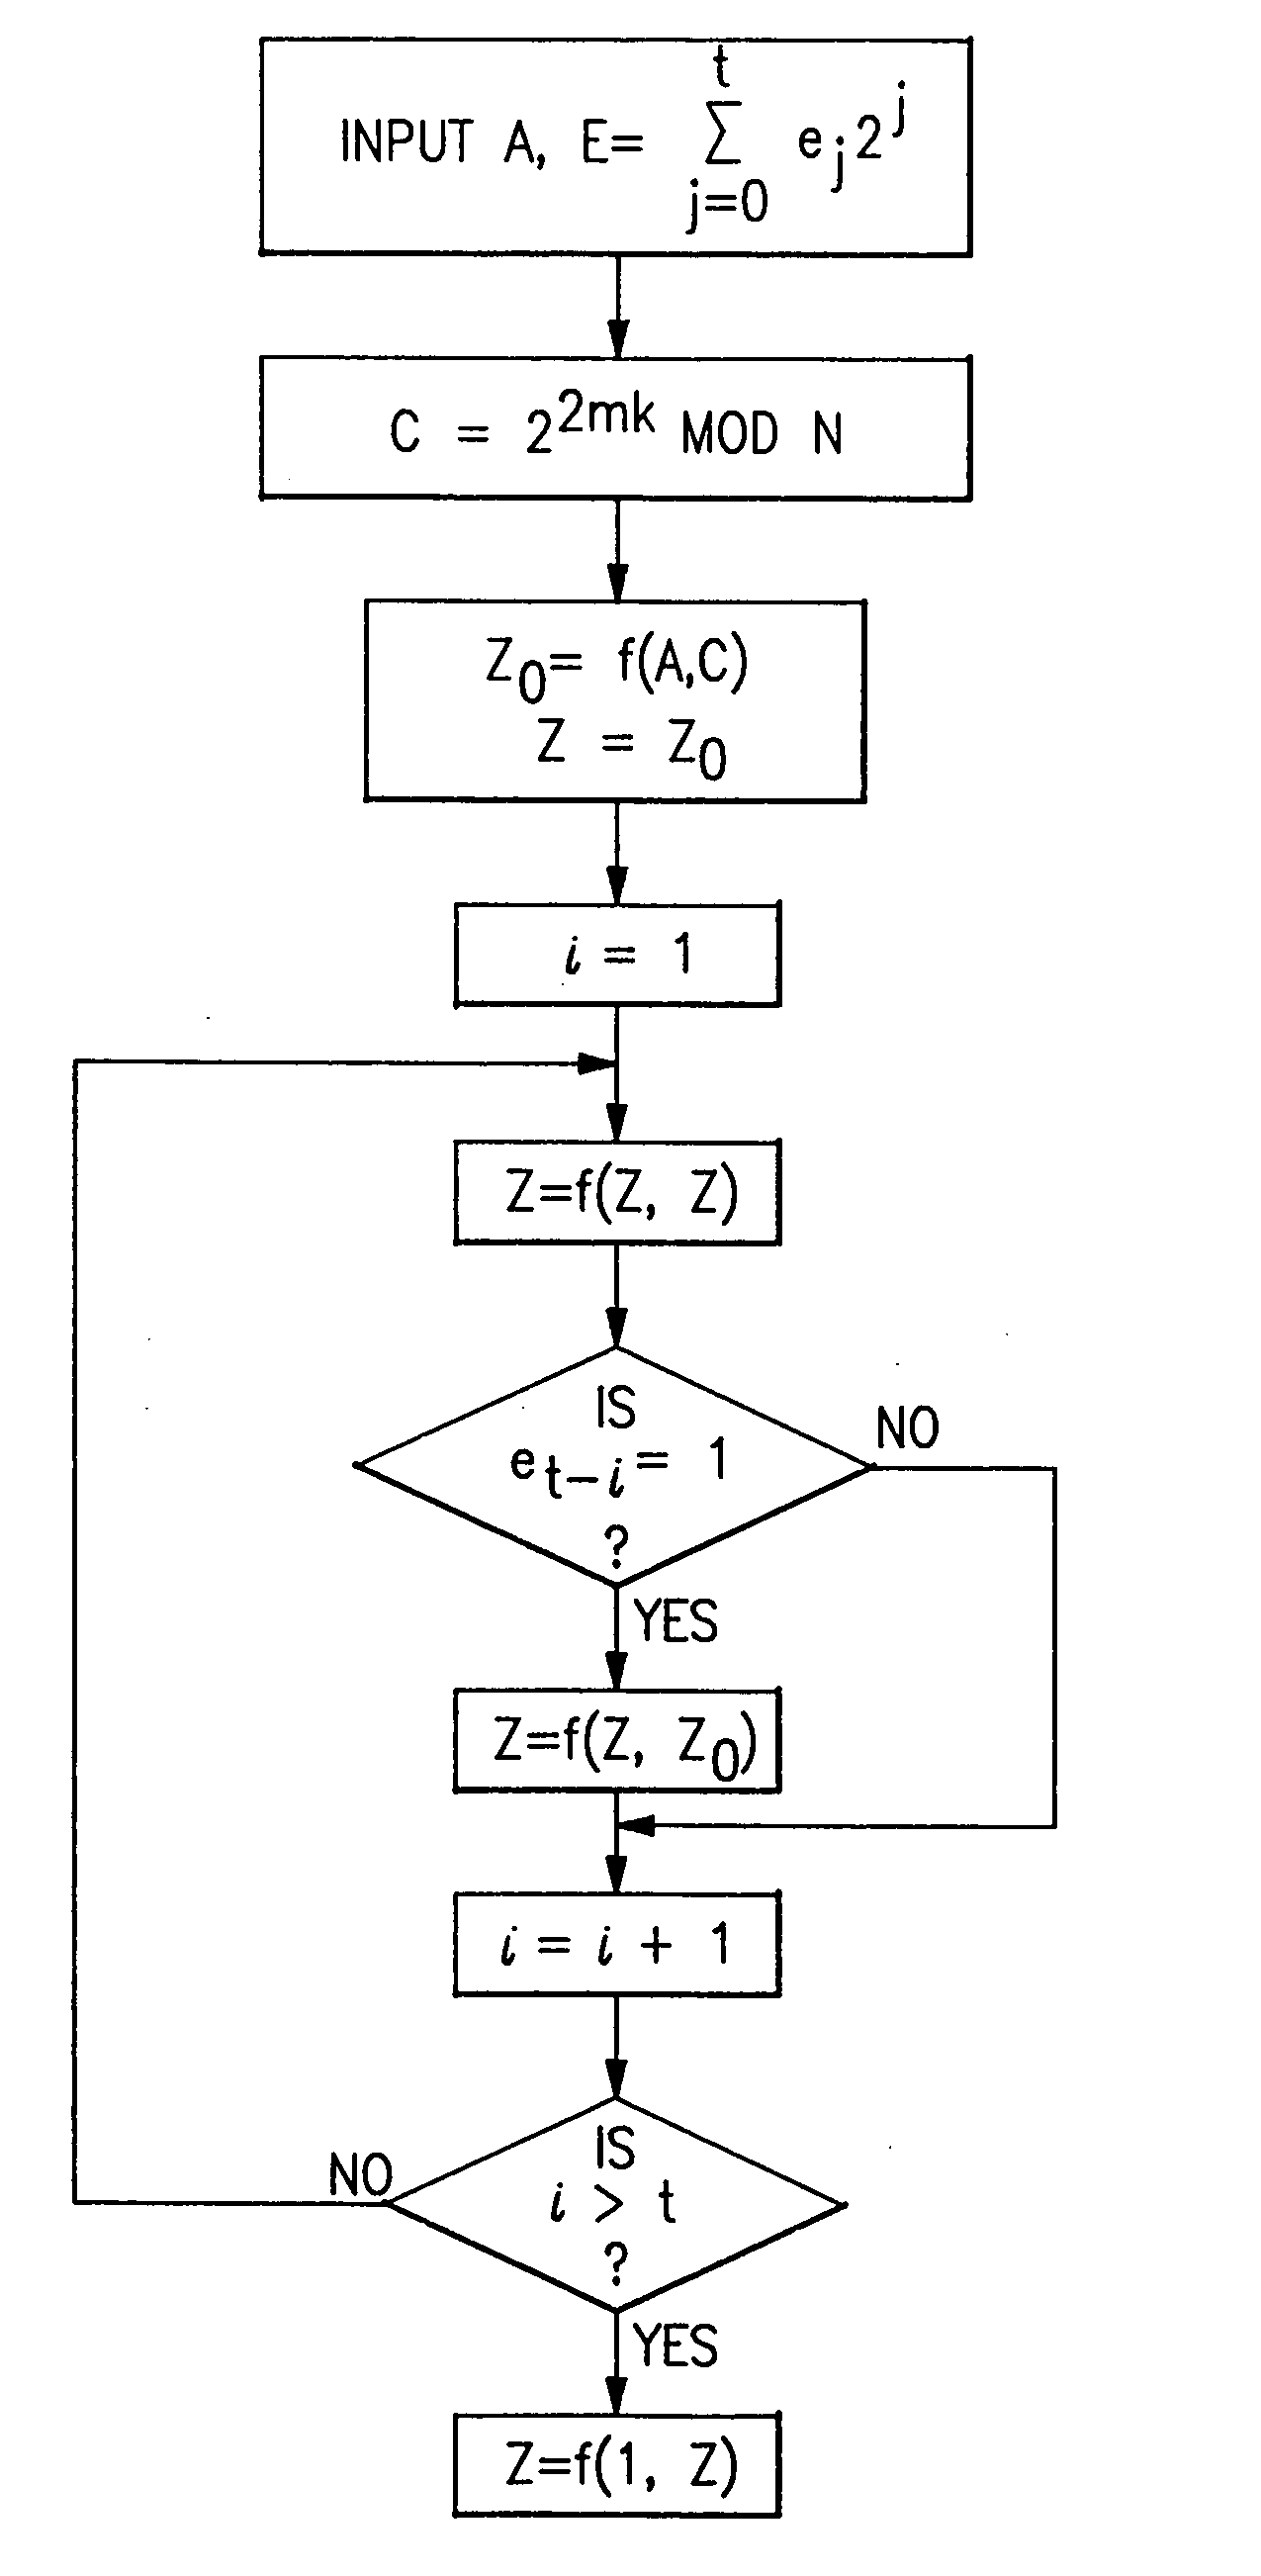 Circuits and methods for modular exponentiation